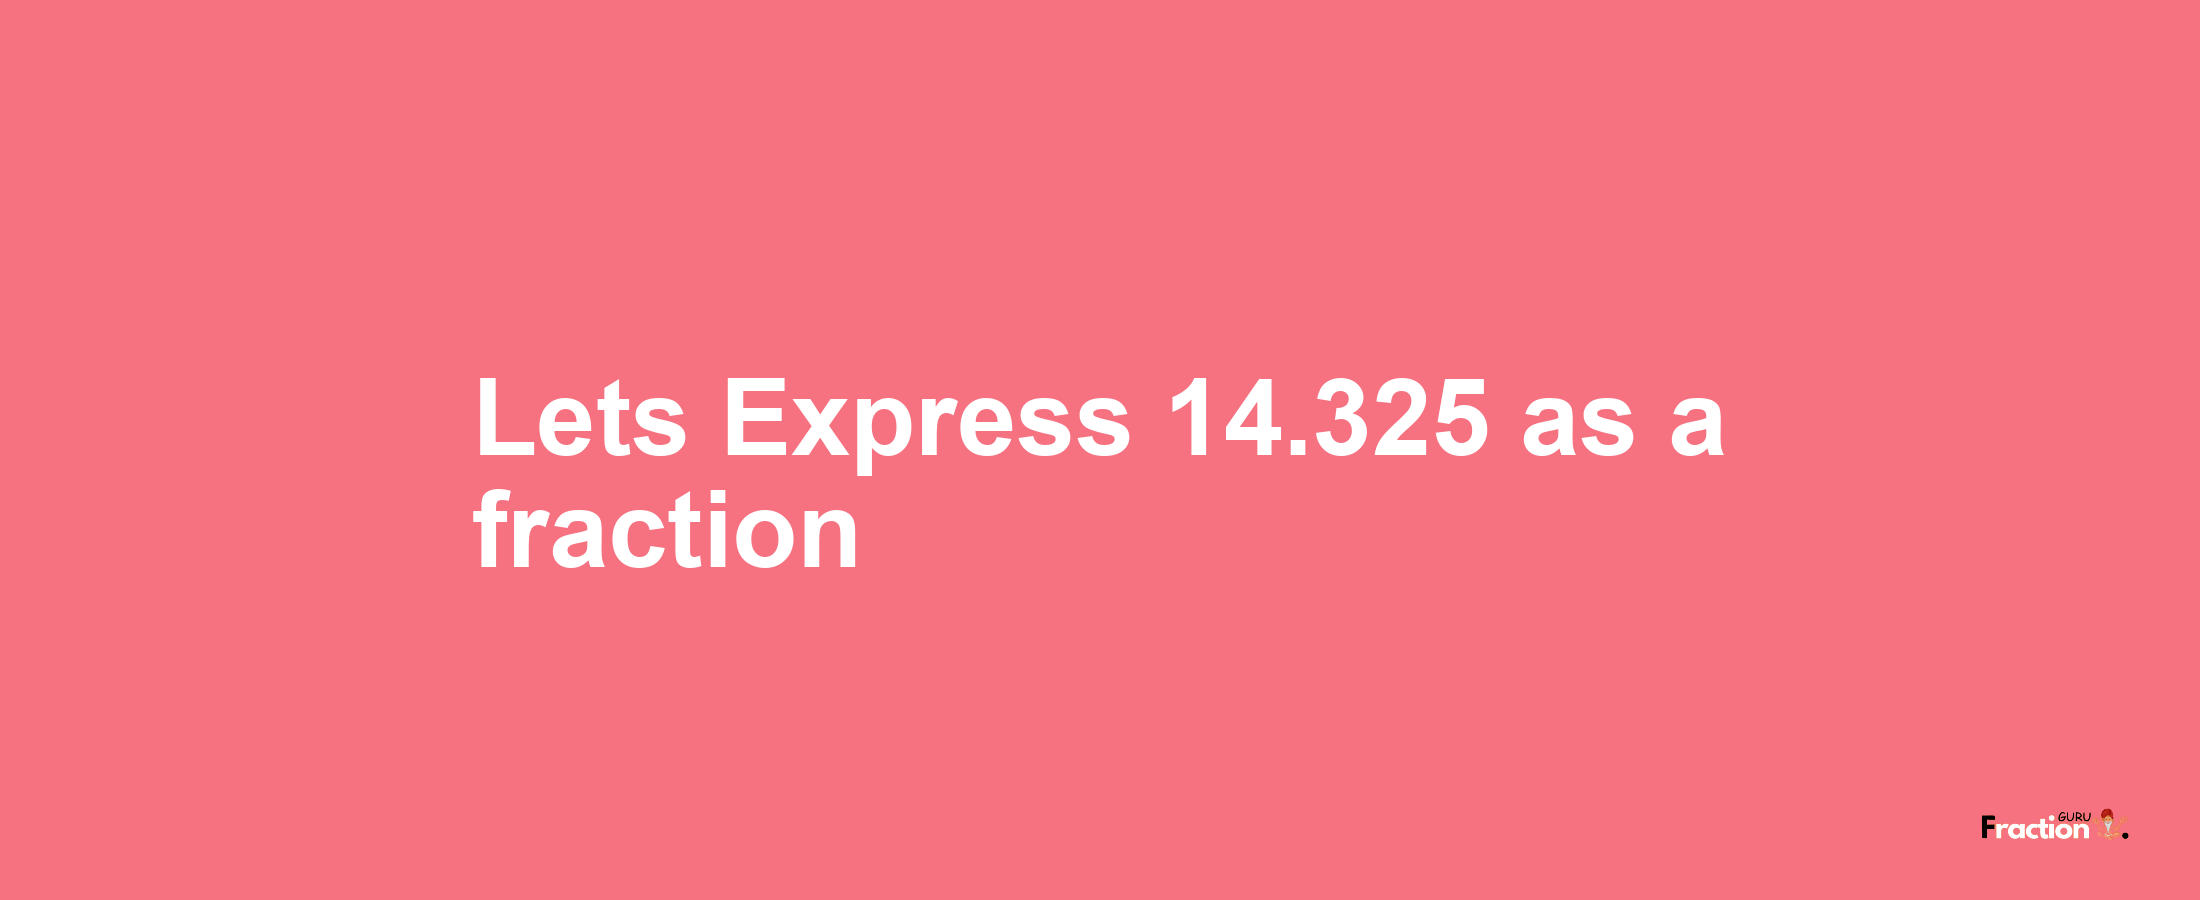 Lets Express 14.325 as afraction